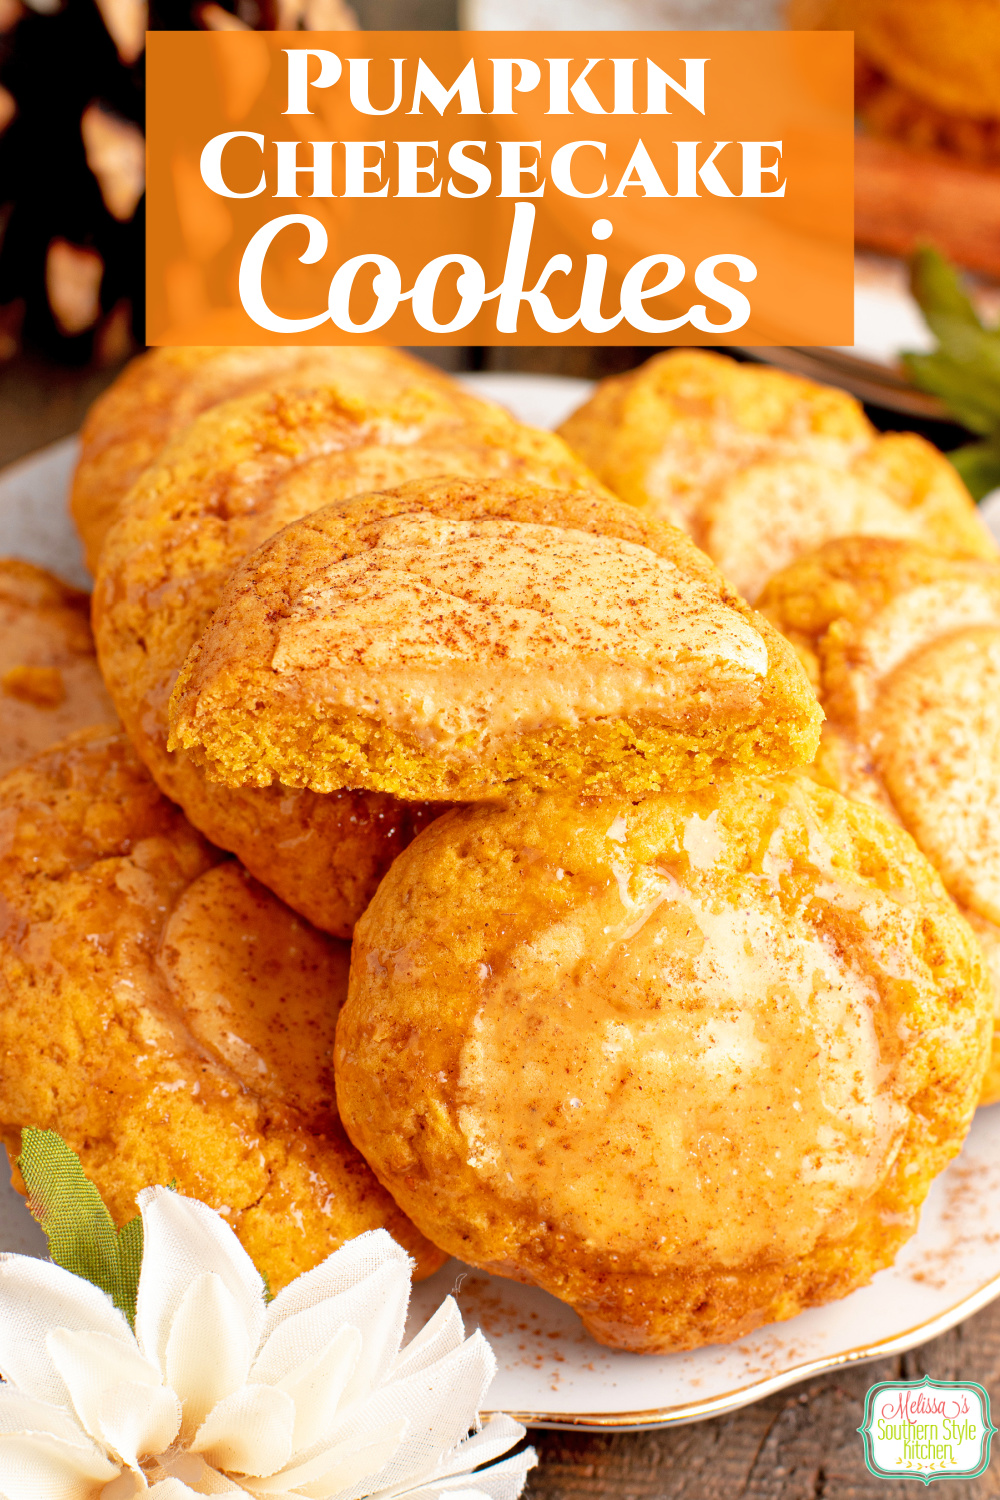 These homemade Pumpkin Cheesecake Cookies have a buttery graham cracker base with a hint of pumpkin and warm fall spices #pumpkinrecipes #pumpkincookies #pumpkincheesecake #cheesecakecookies #pumpkindesserts via @melissasssk